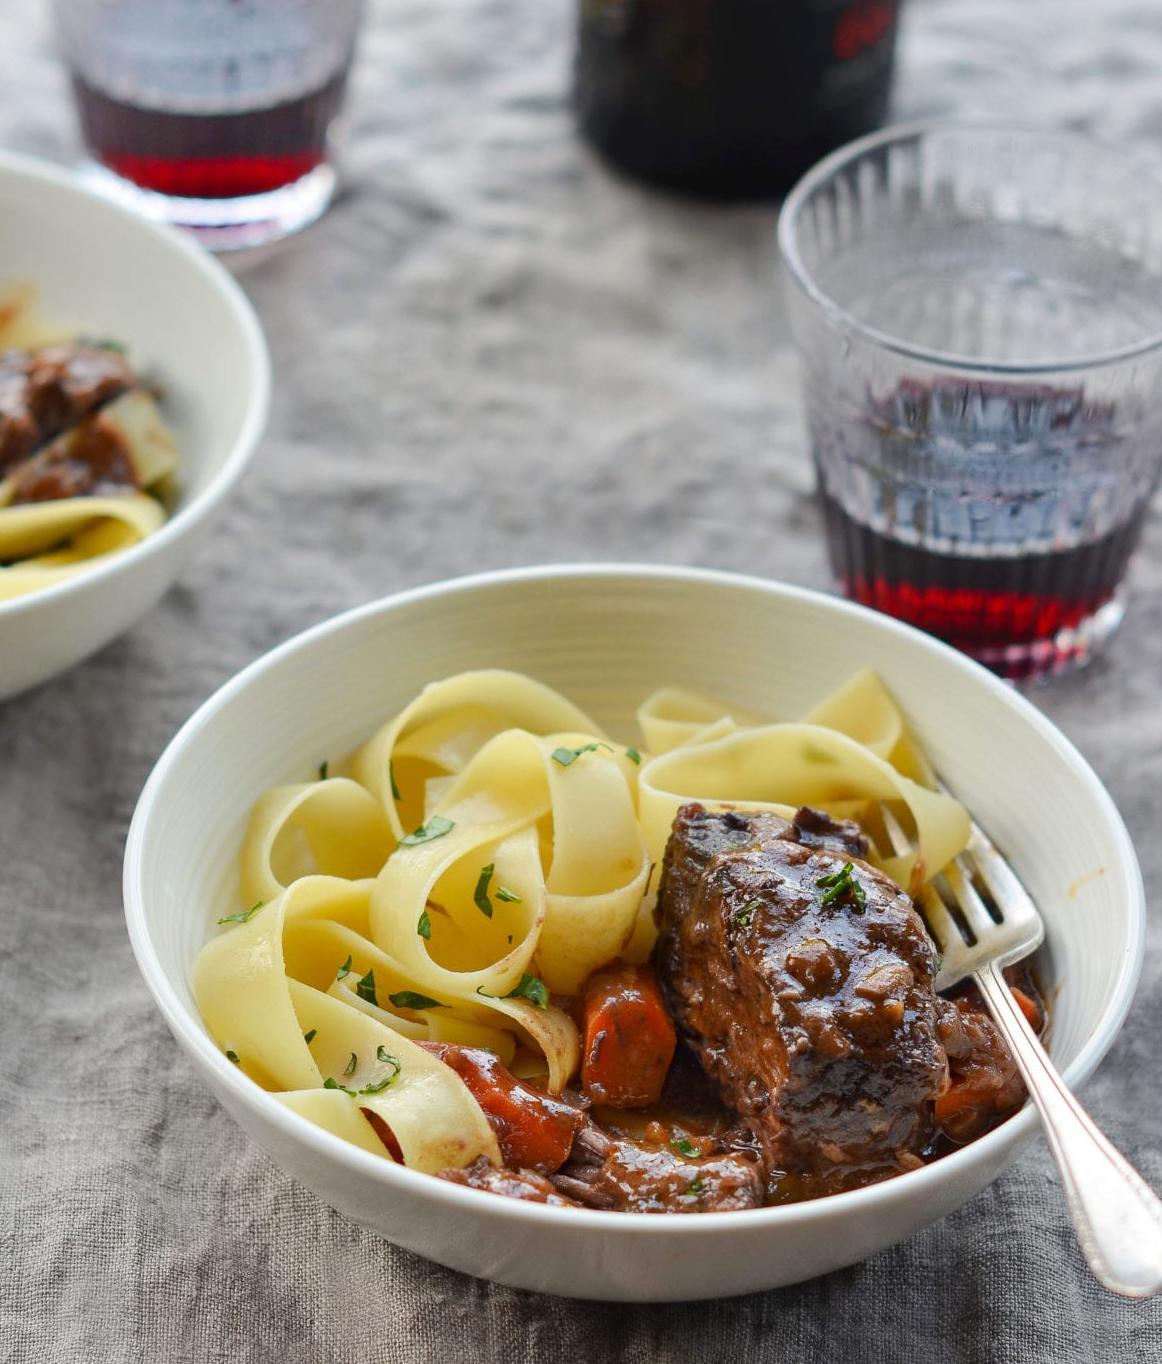  The perfect dish for a cozy night in, with a glass of red wine in hand.